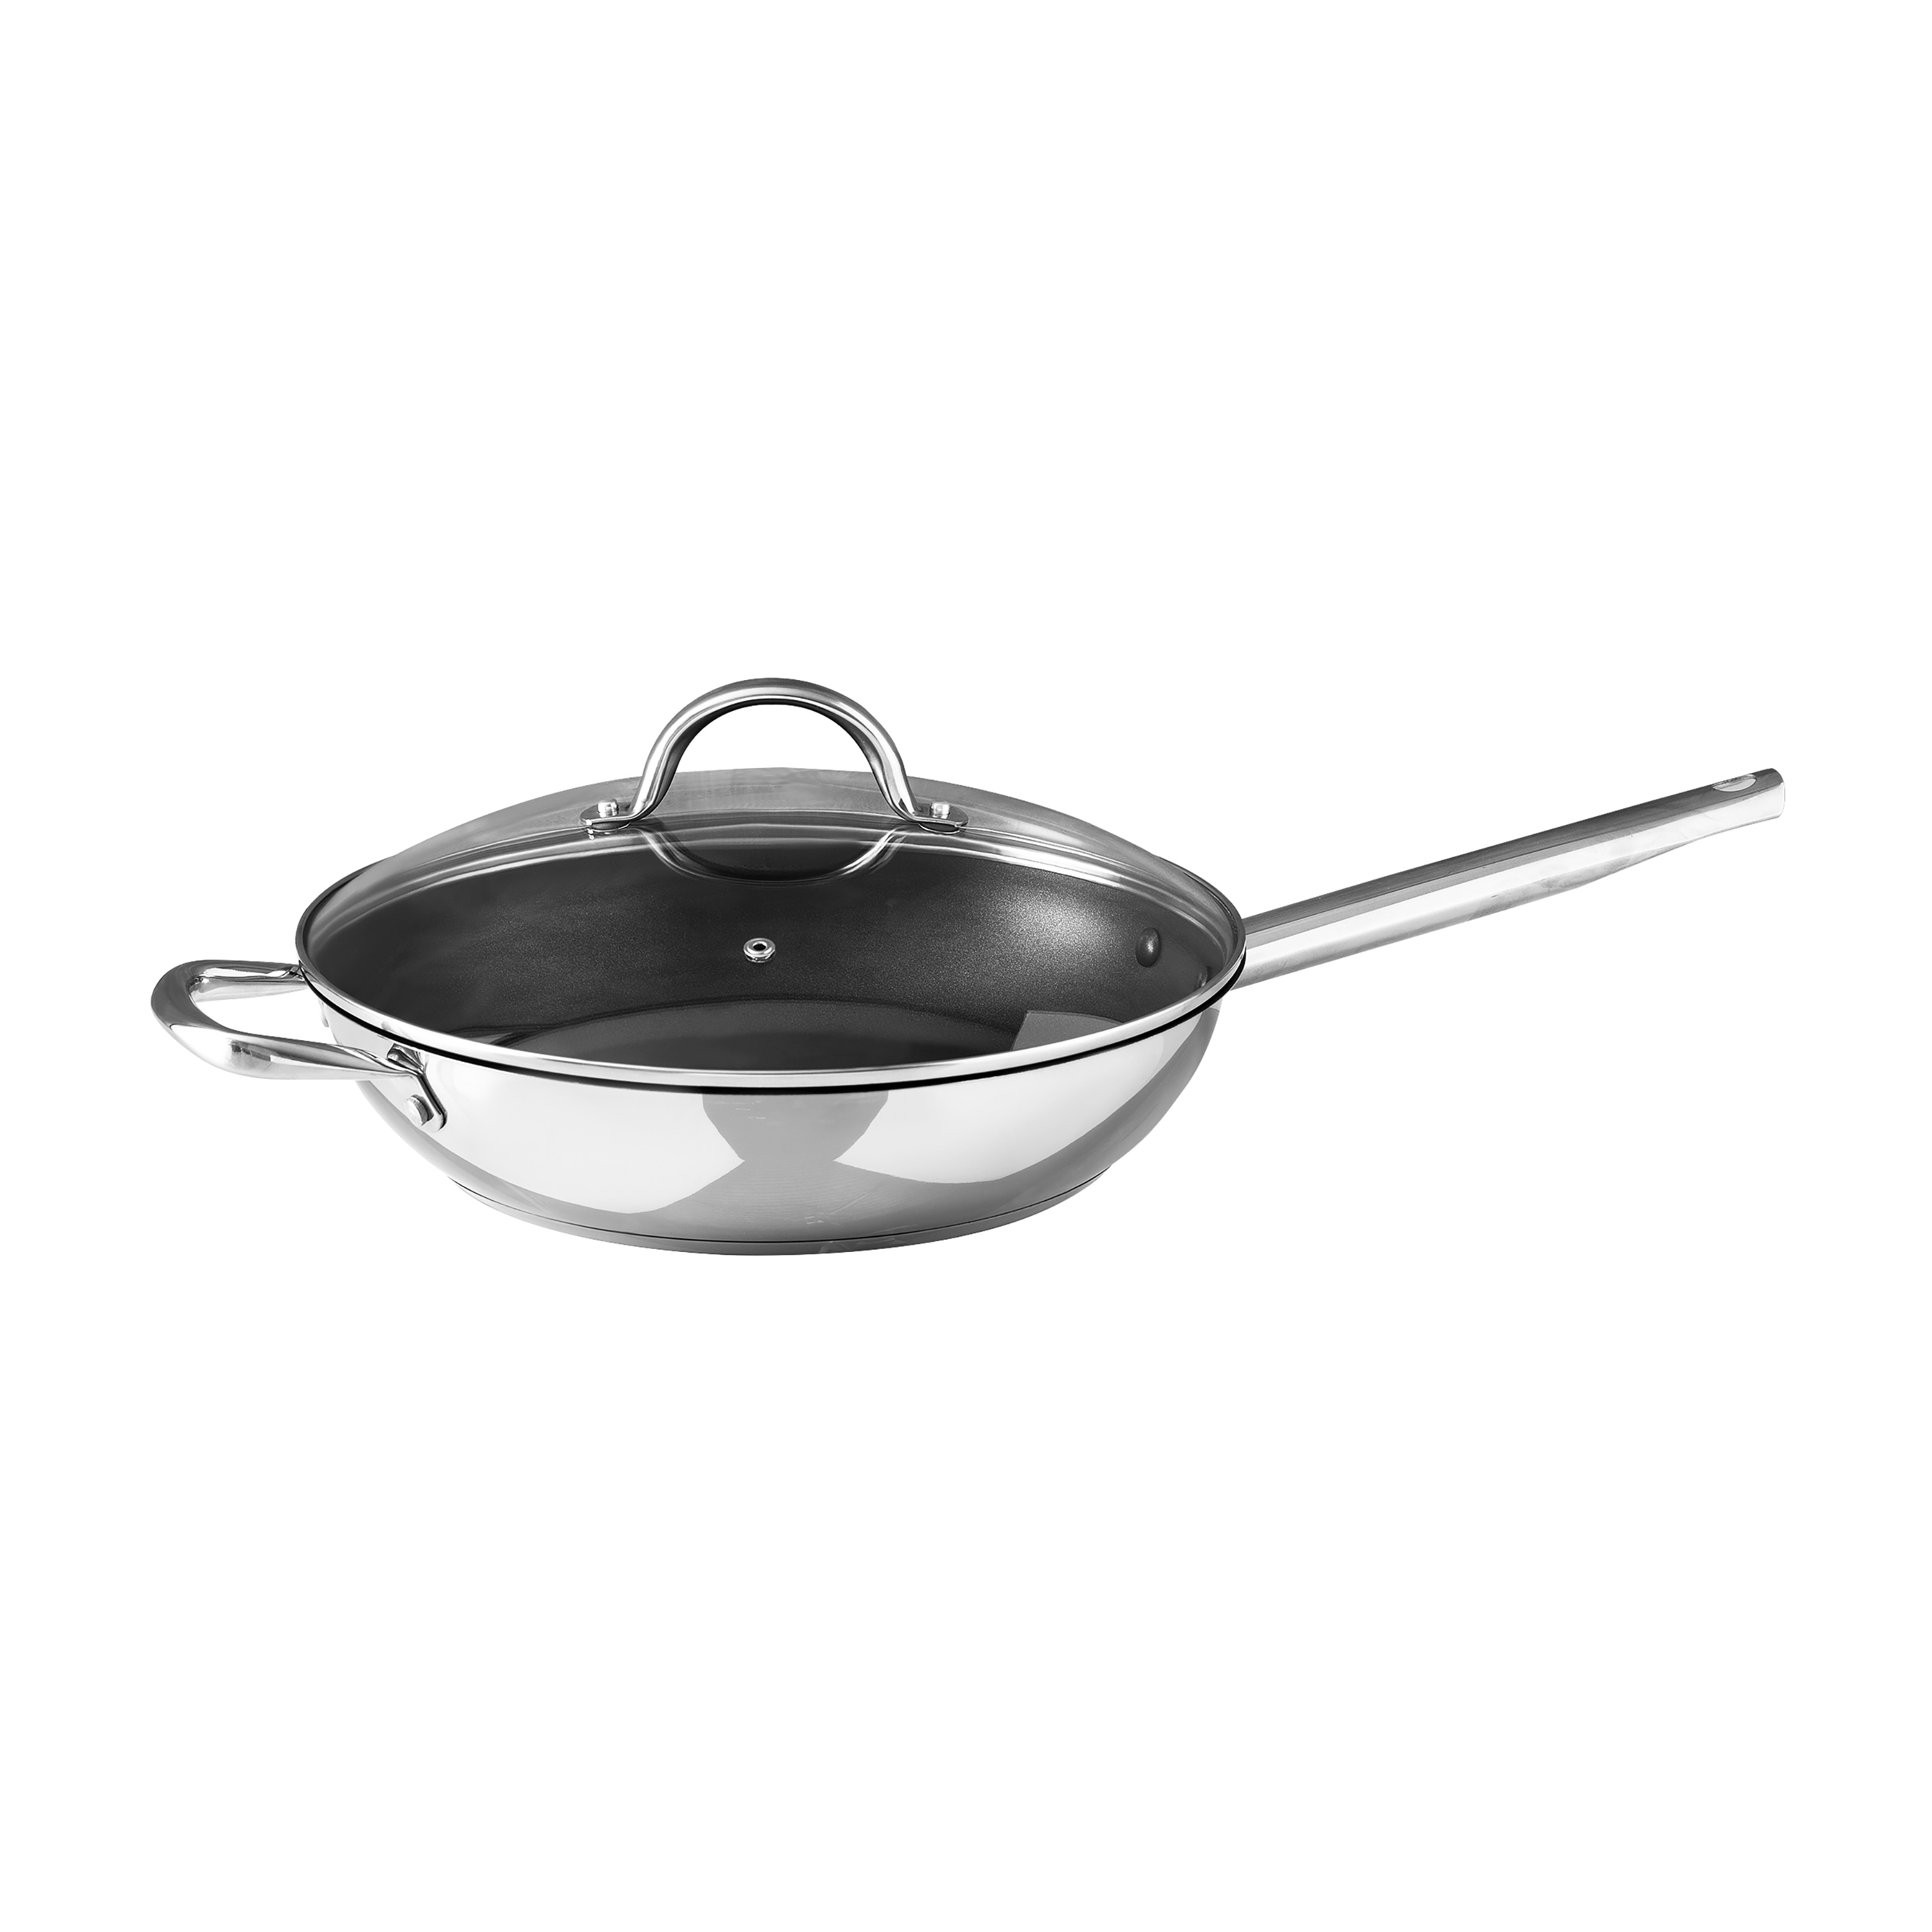 Bergner 12-Inch Non-Stick Stainless Steel Fry Pan with Lid - 12 inch - Silver